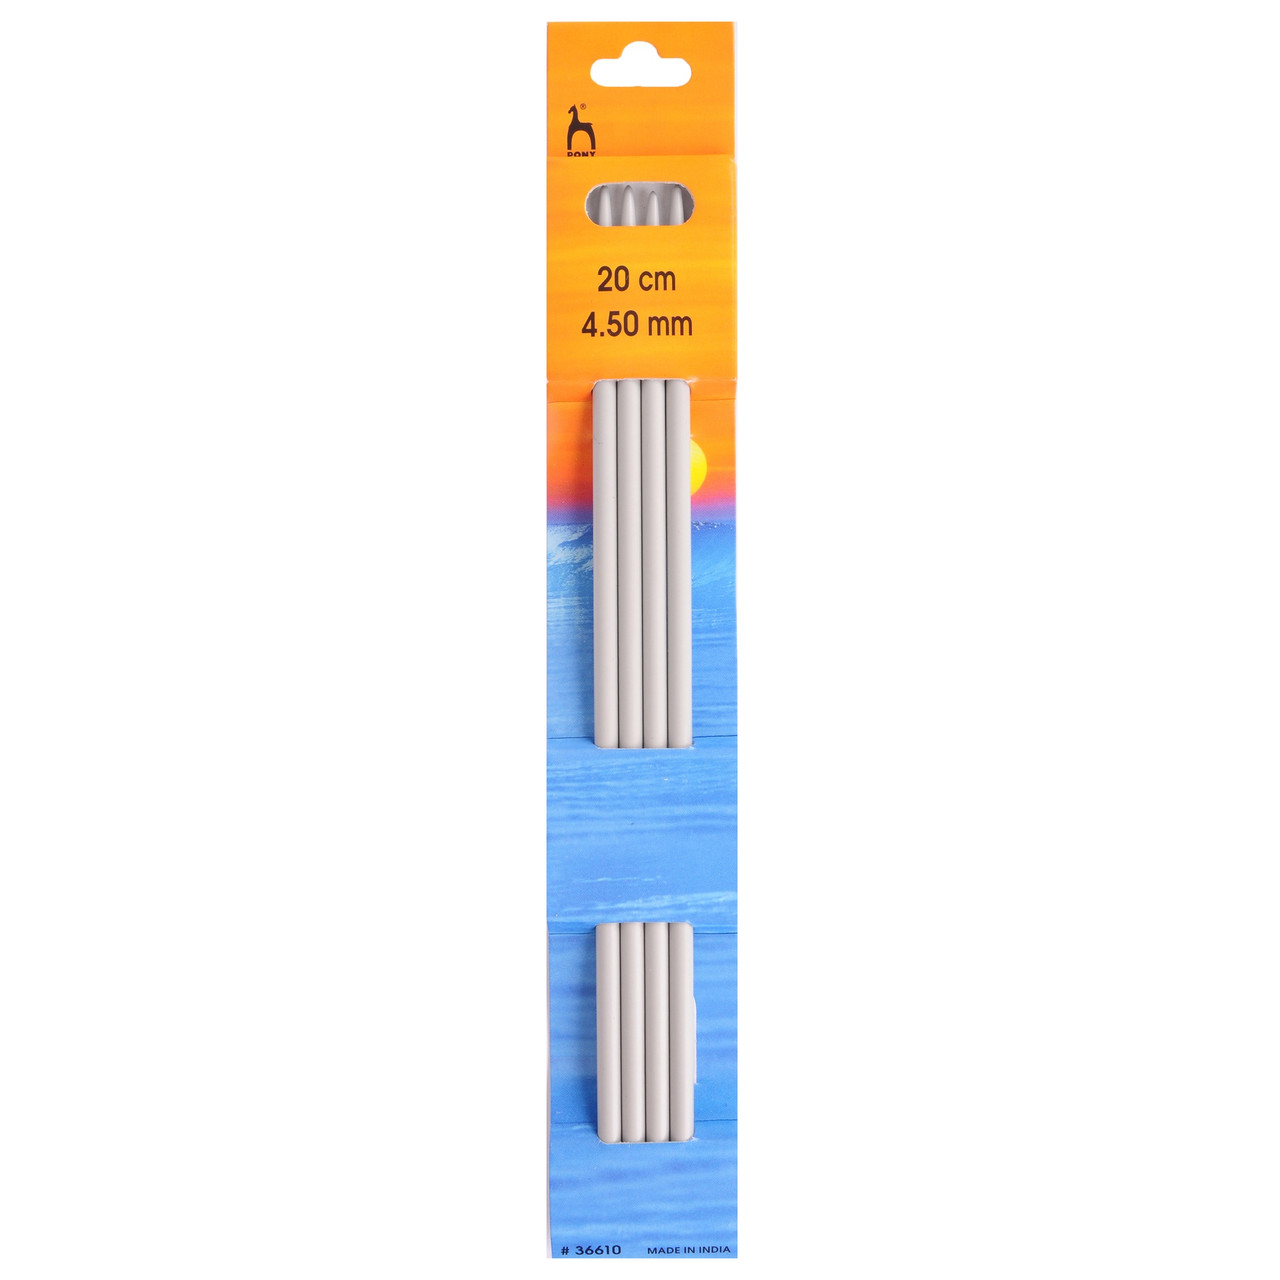 4.50mm Set of 4 Double-Ended Knitting Pins, 20cm length